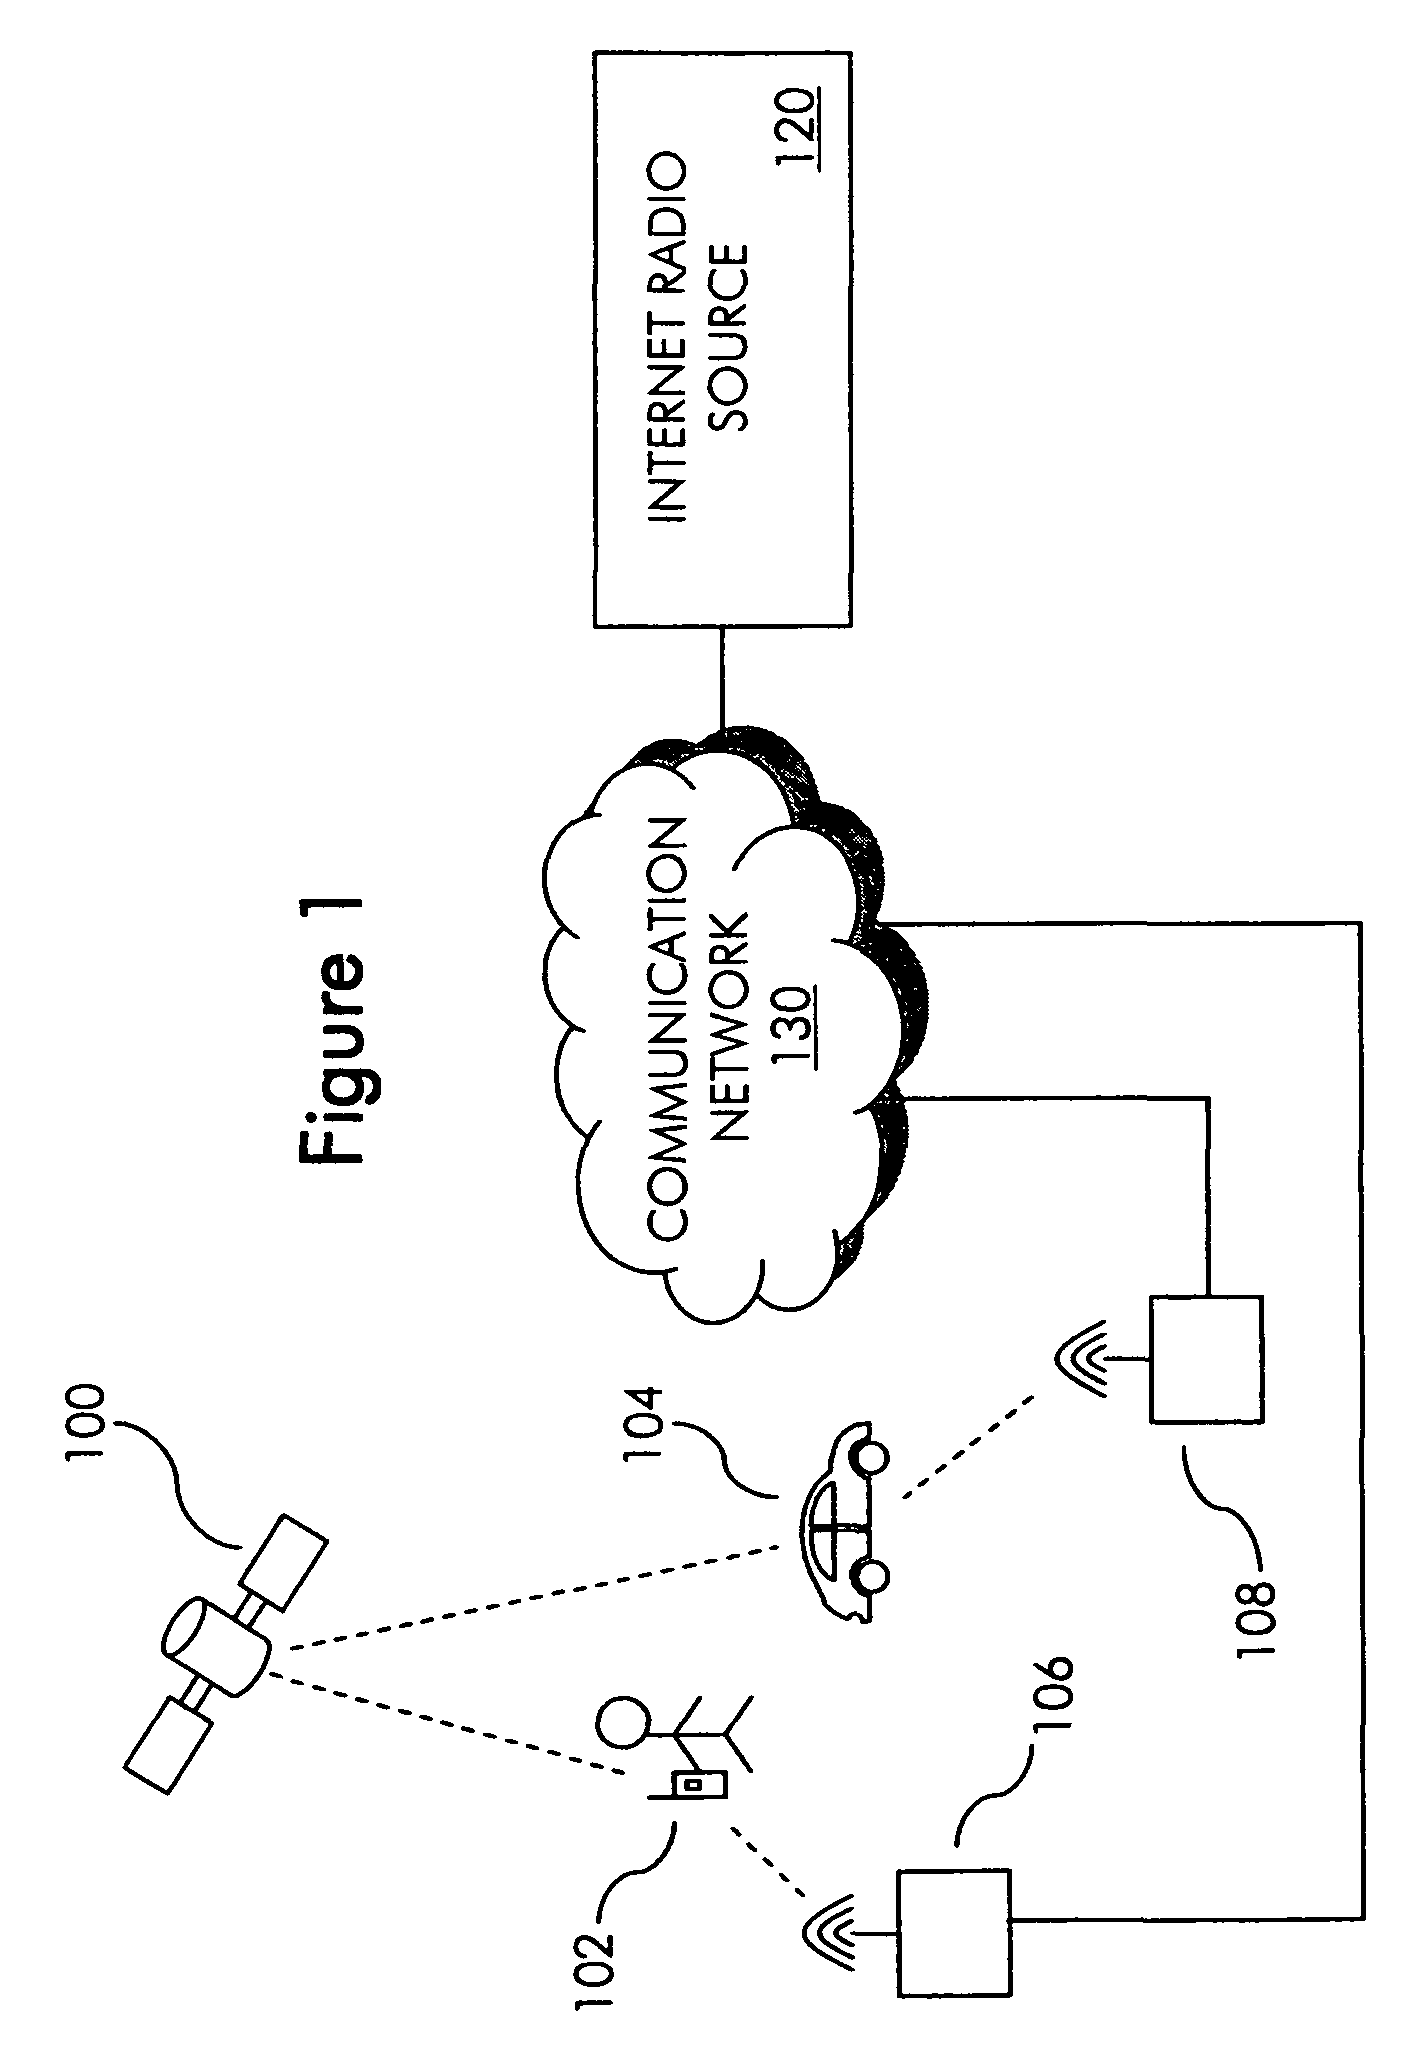 Methods and systems for selecting internet radio program break content using mobile device location